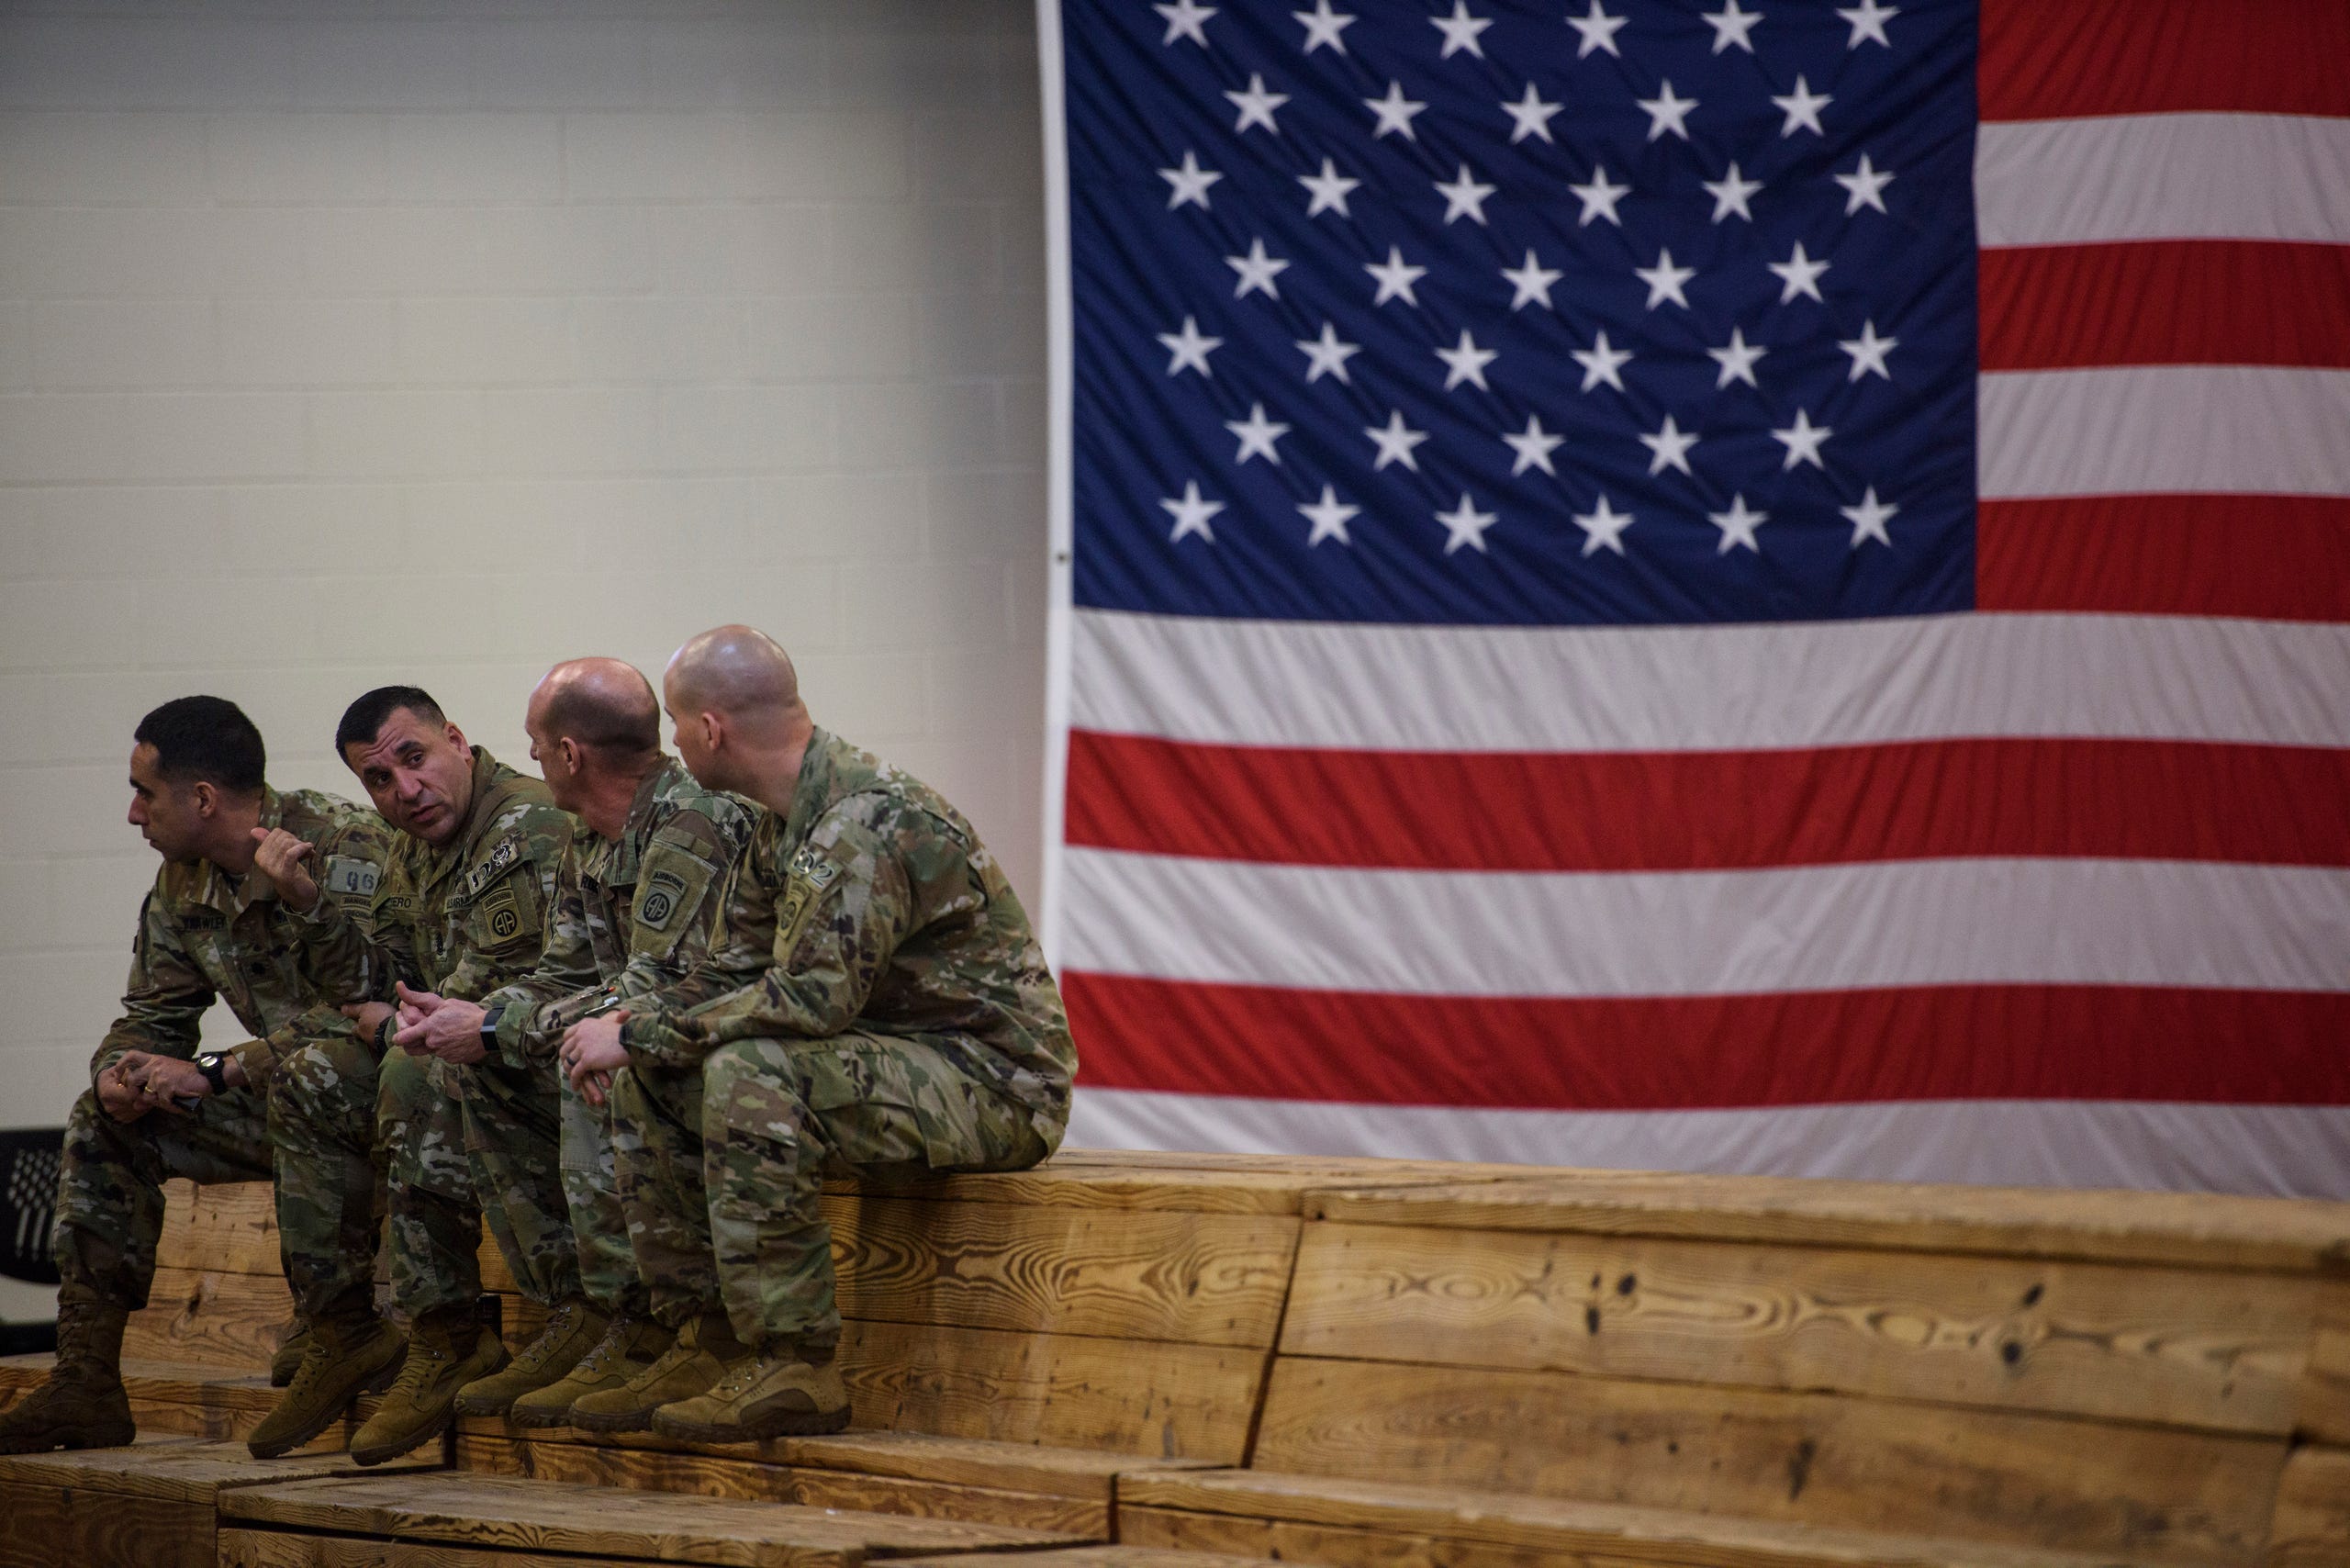 US Army Soldiers with the 82nd Airborne Division wait to be deployed to the Middle East on Saturday, Jan. 4, 2020 from Fort Bragg, N.C. Troops will deploy to the Middle East as tensions between the US and Iran continue to rise.